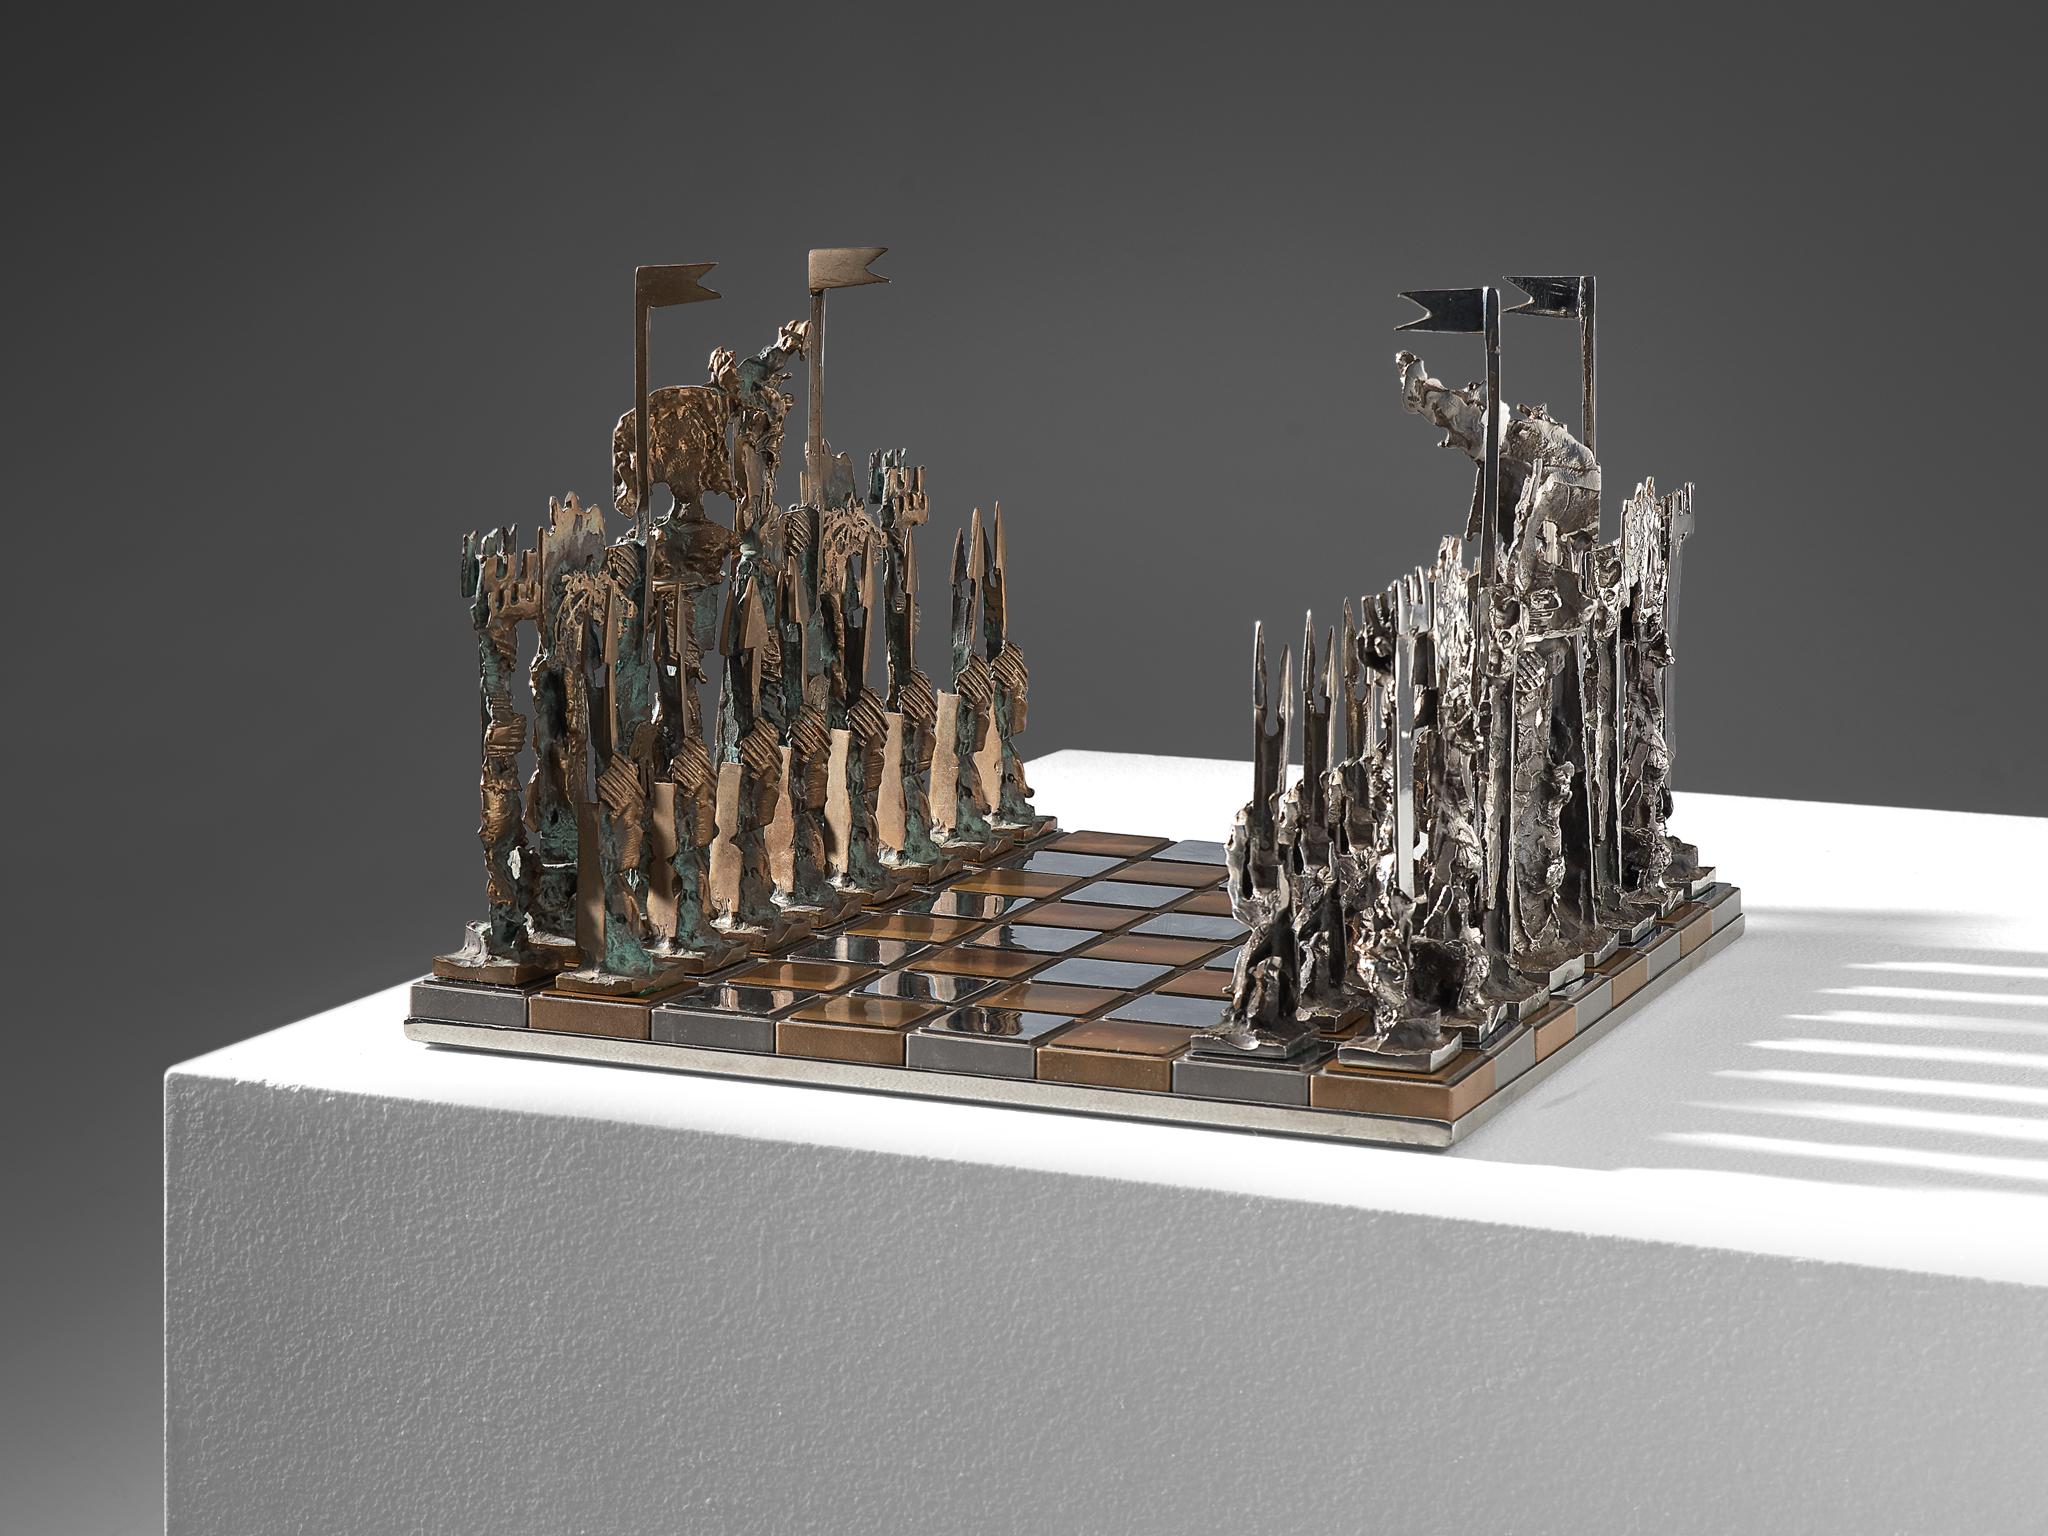 Chess game, bronze, bronze, metal and mirror, Italy, circa 1970.  

Exceptional game of chess. The board consists of silver colored metal and bronze mirrored cubes. All chess pieces are casted, solid and therefore are very heavy. It's noticeable